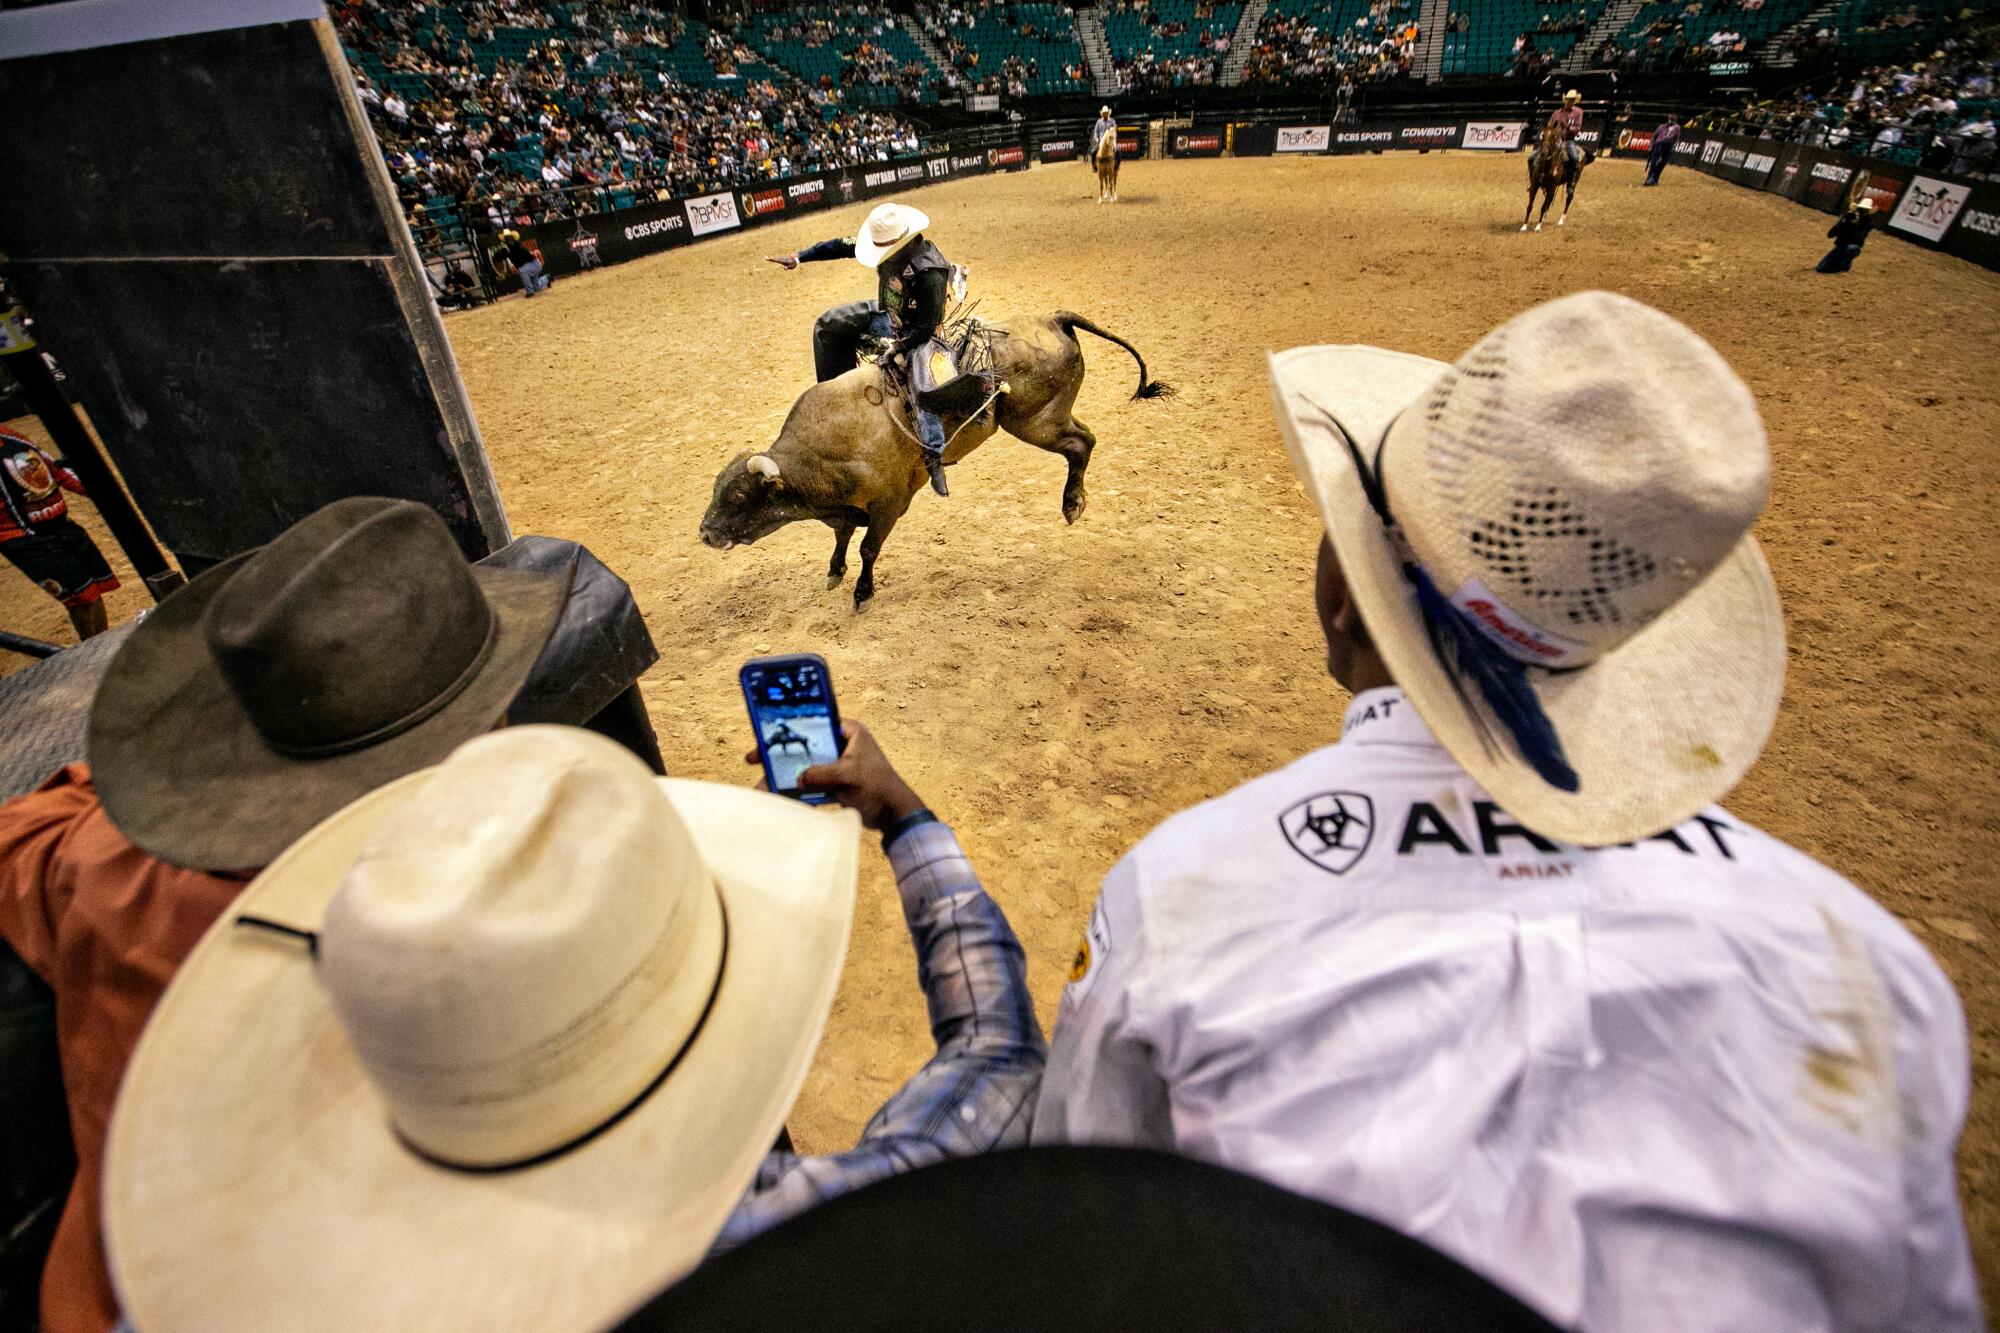 A view over the shoulders of cowboys perched on a bull-riding chute watching a competitor